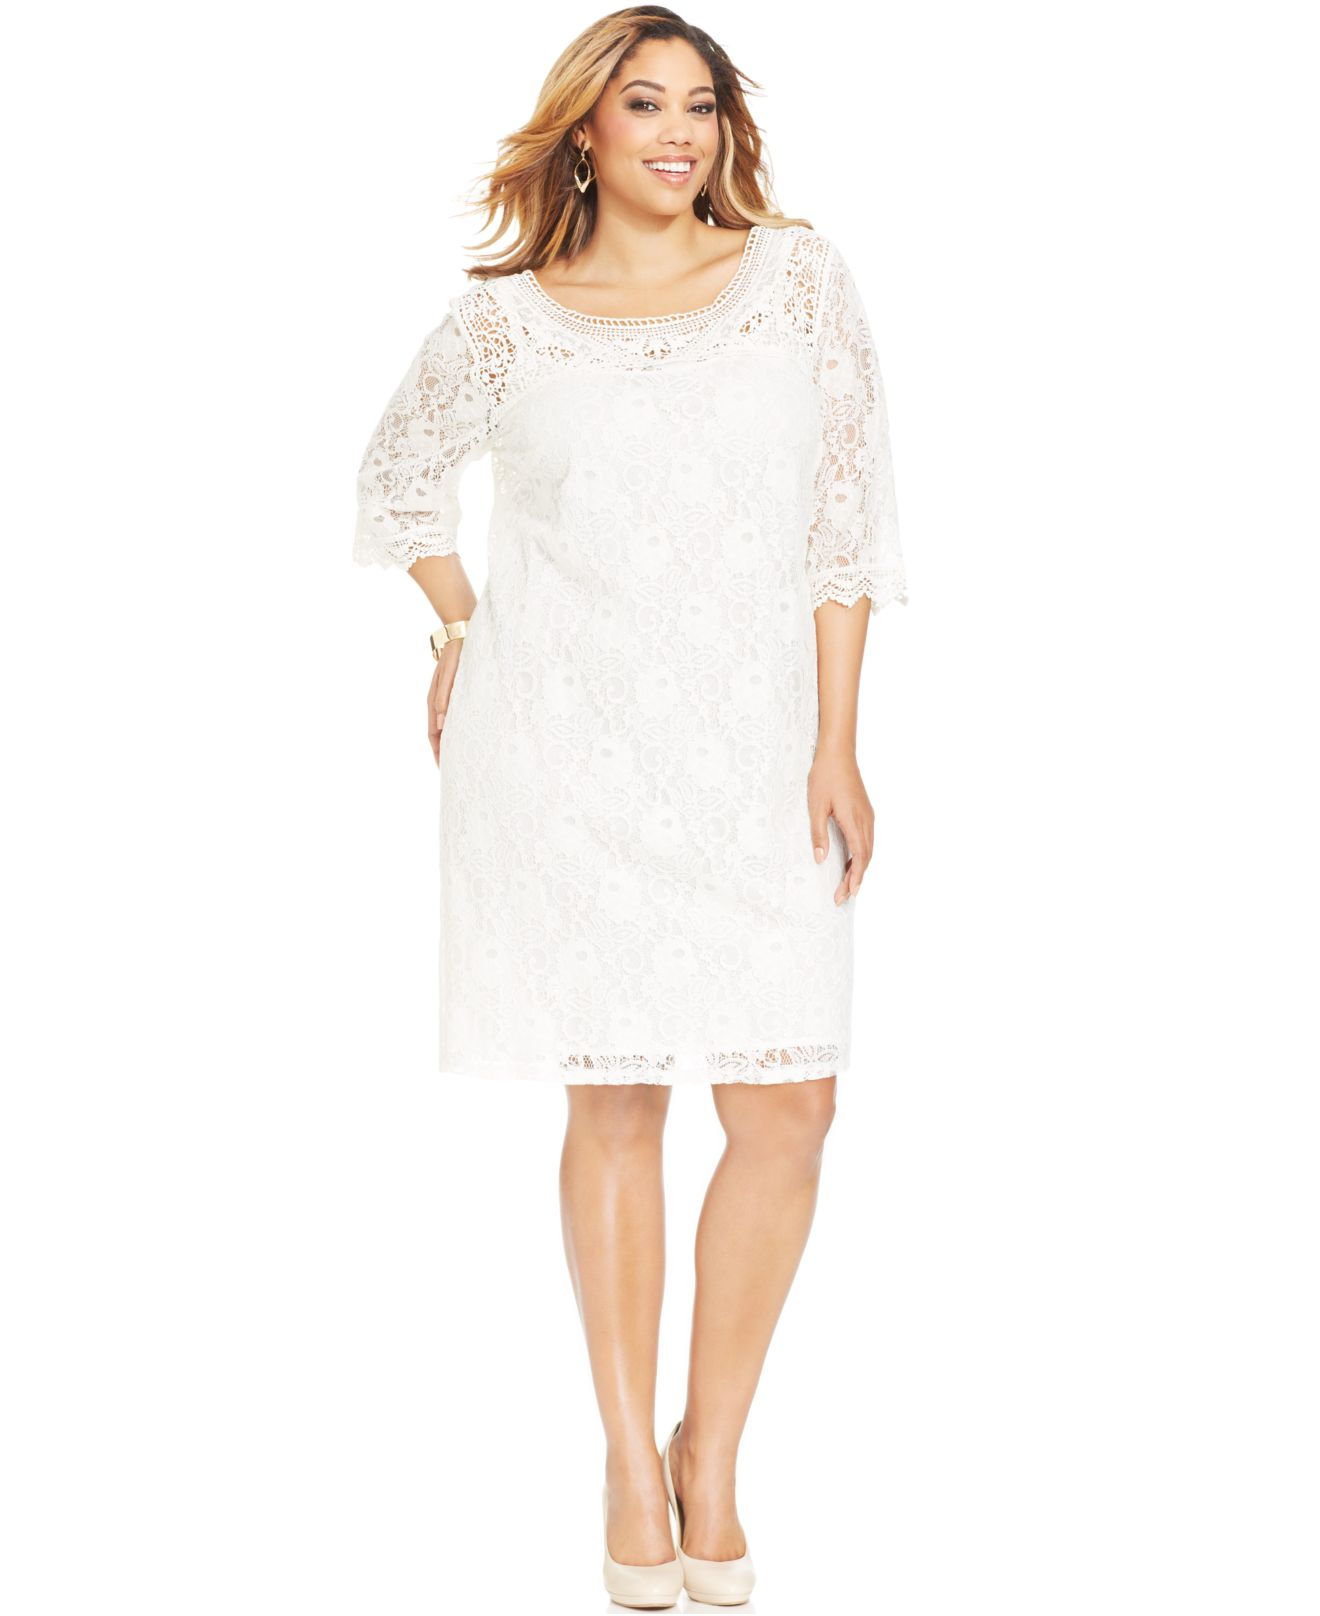 Lyst - Spense Plus Size Three-Quarter-Sleeve Lace Dress in White